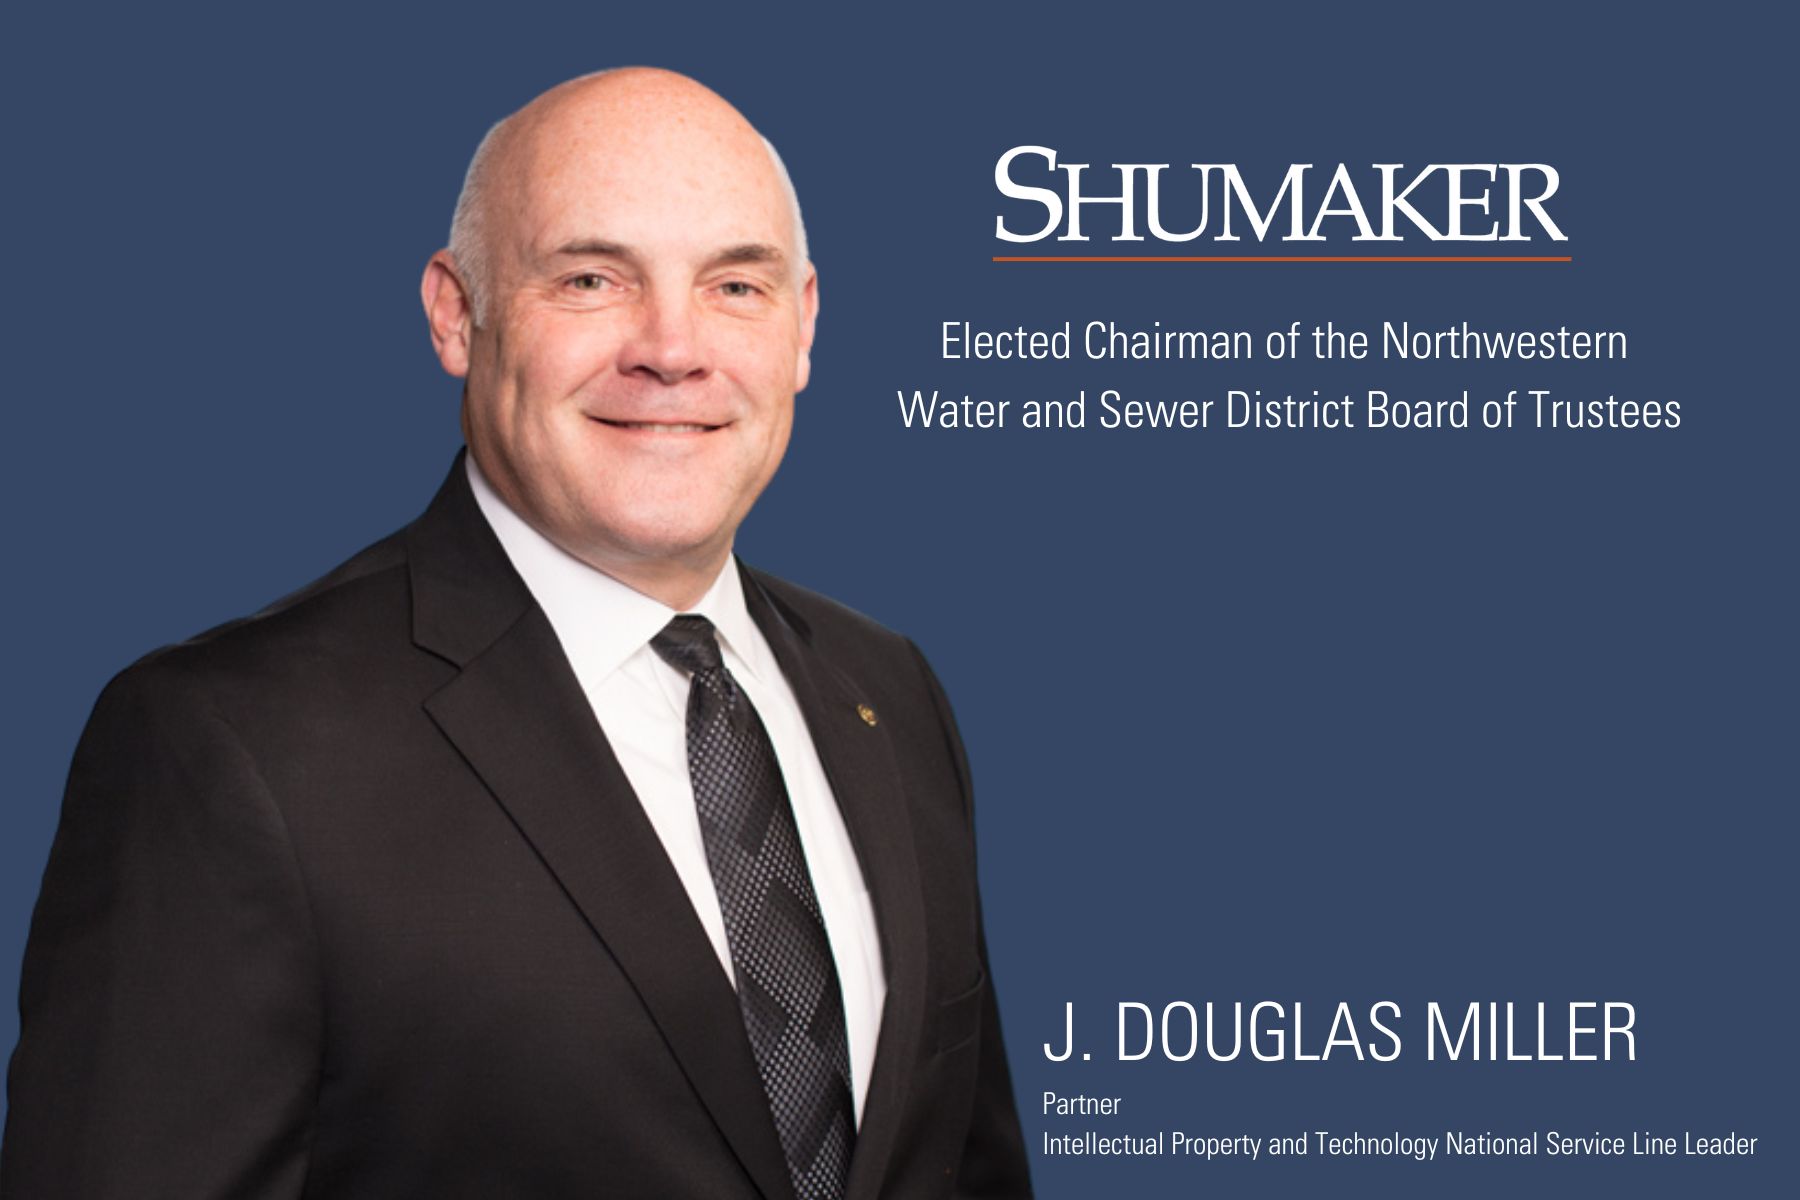 Doug Miller Continues Long-standing Commitment to Northwestern Water and Sewer District; Elected Board of Trustees Chairman